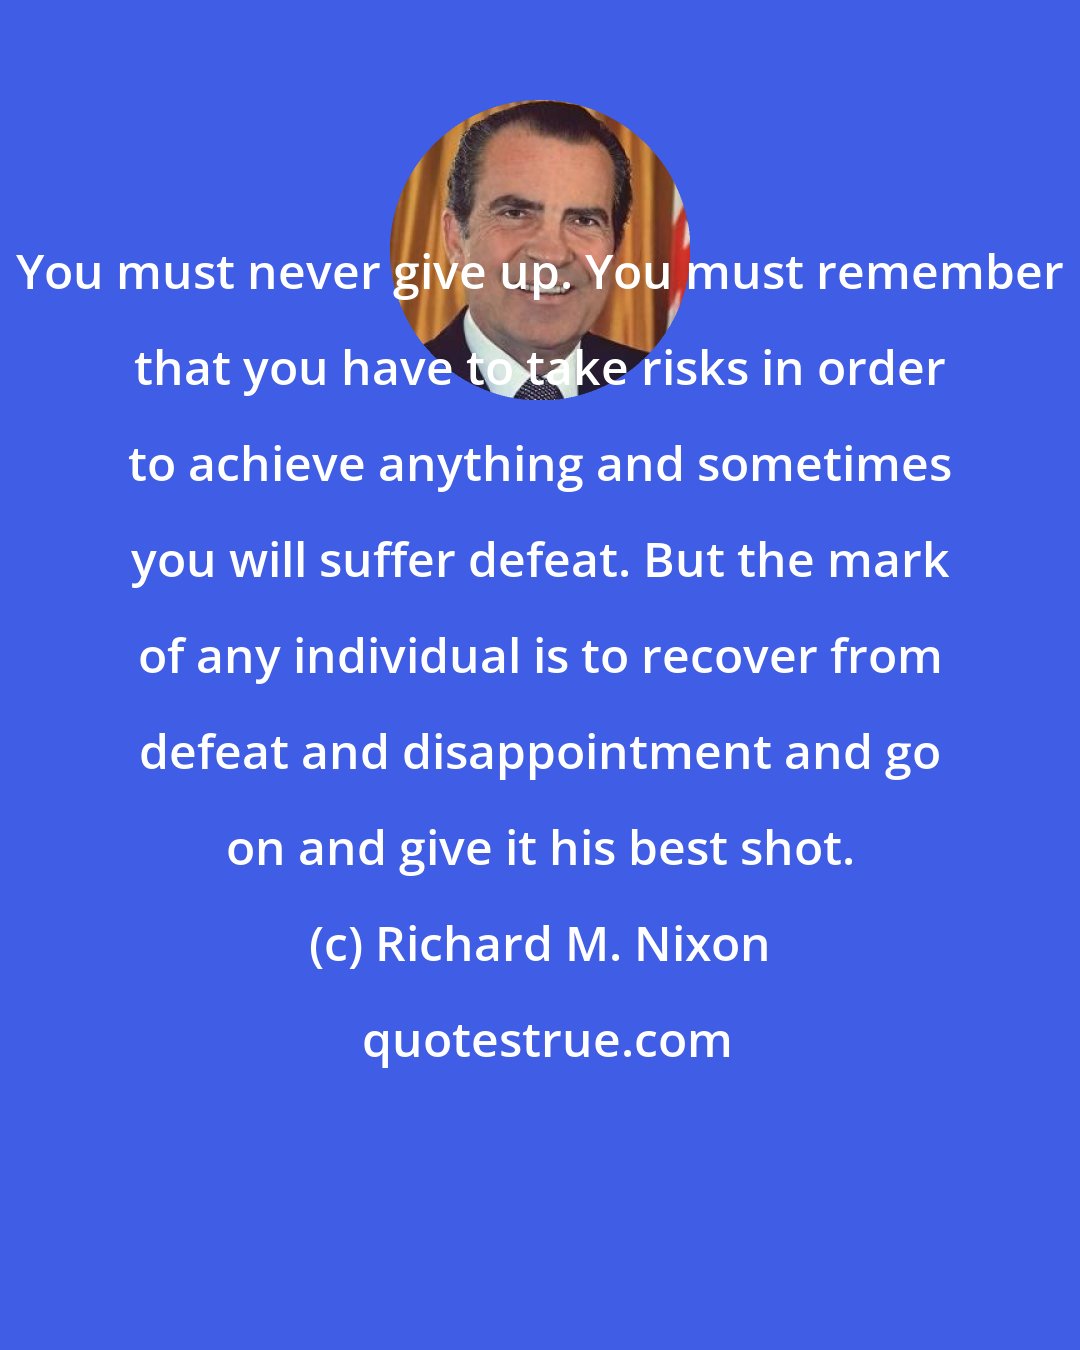 Richard M. Nixon: You must never give up. You must remember that you have to take risks in order to achieve anything and sometimes you will suffer defeat. But the mark of any individual is to recover from defeat and disappointment and go on and give it his best shot.